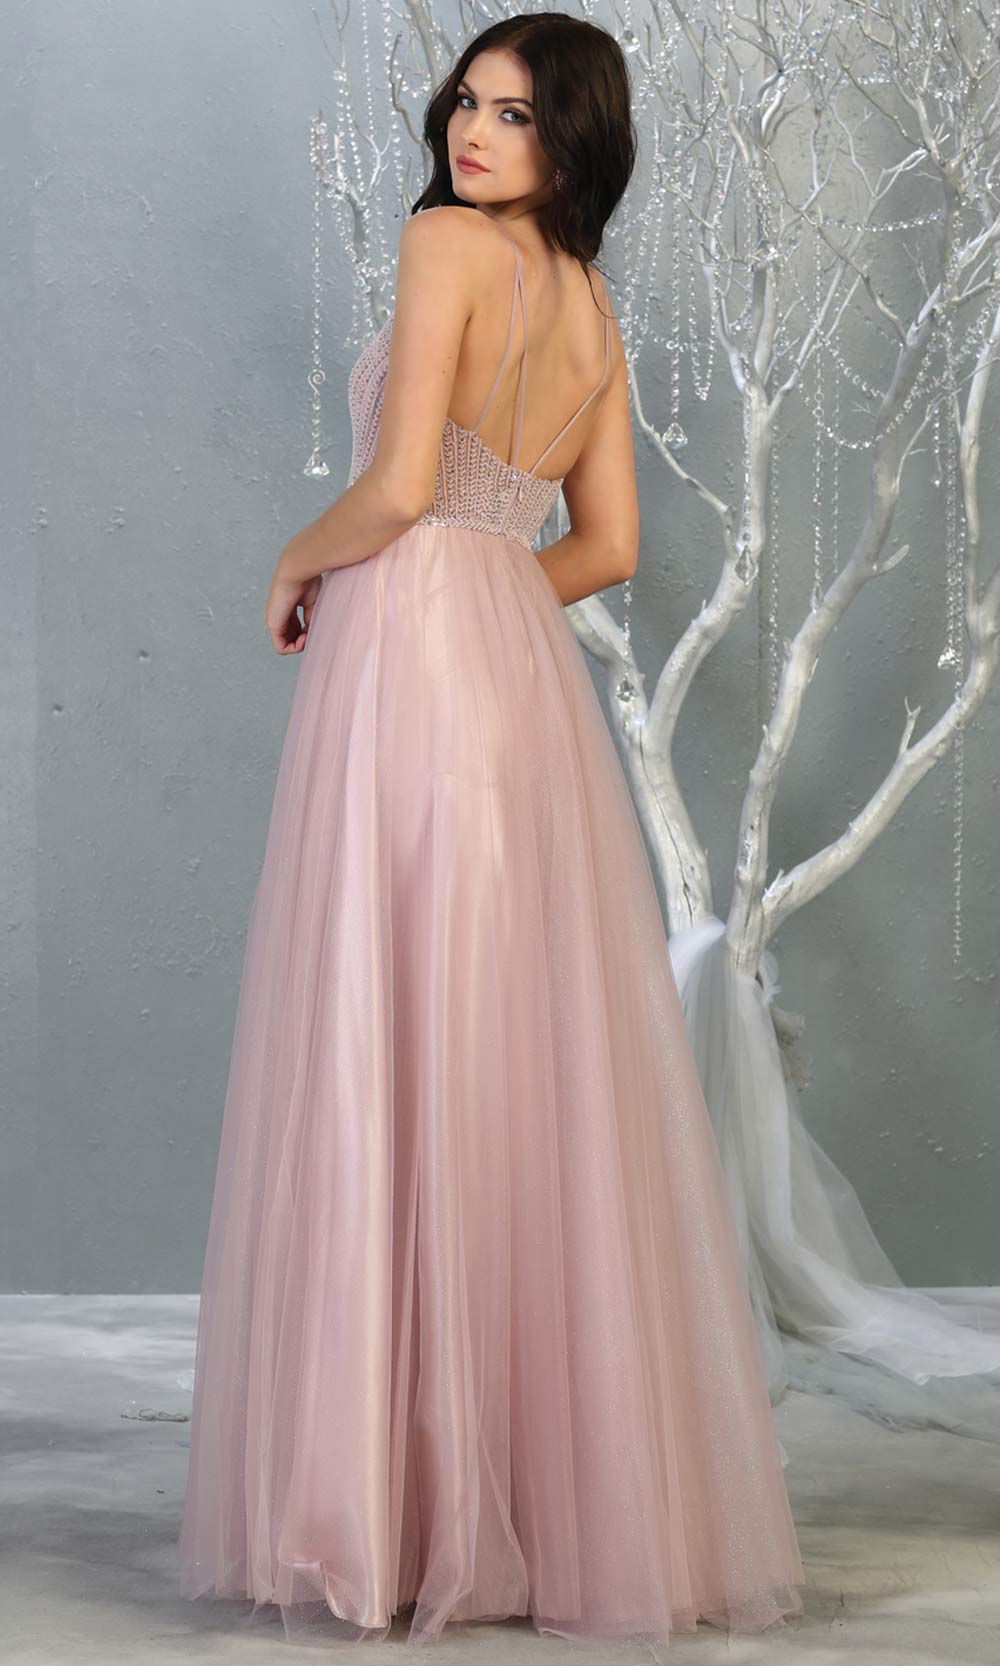 Mayqueen MQ1812 long mauve pink v neck evening flowy tulle dress.Full length dusty rose beaded top w/wide straps is perfect for  enagagement/e-shoot dress, formal wedding guest, indowestern gown, evening party dress,prom, bridesmaid.Plus sizes avail-b.jpg